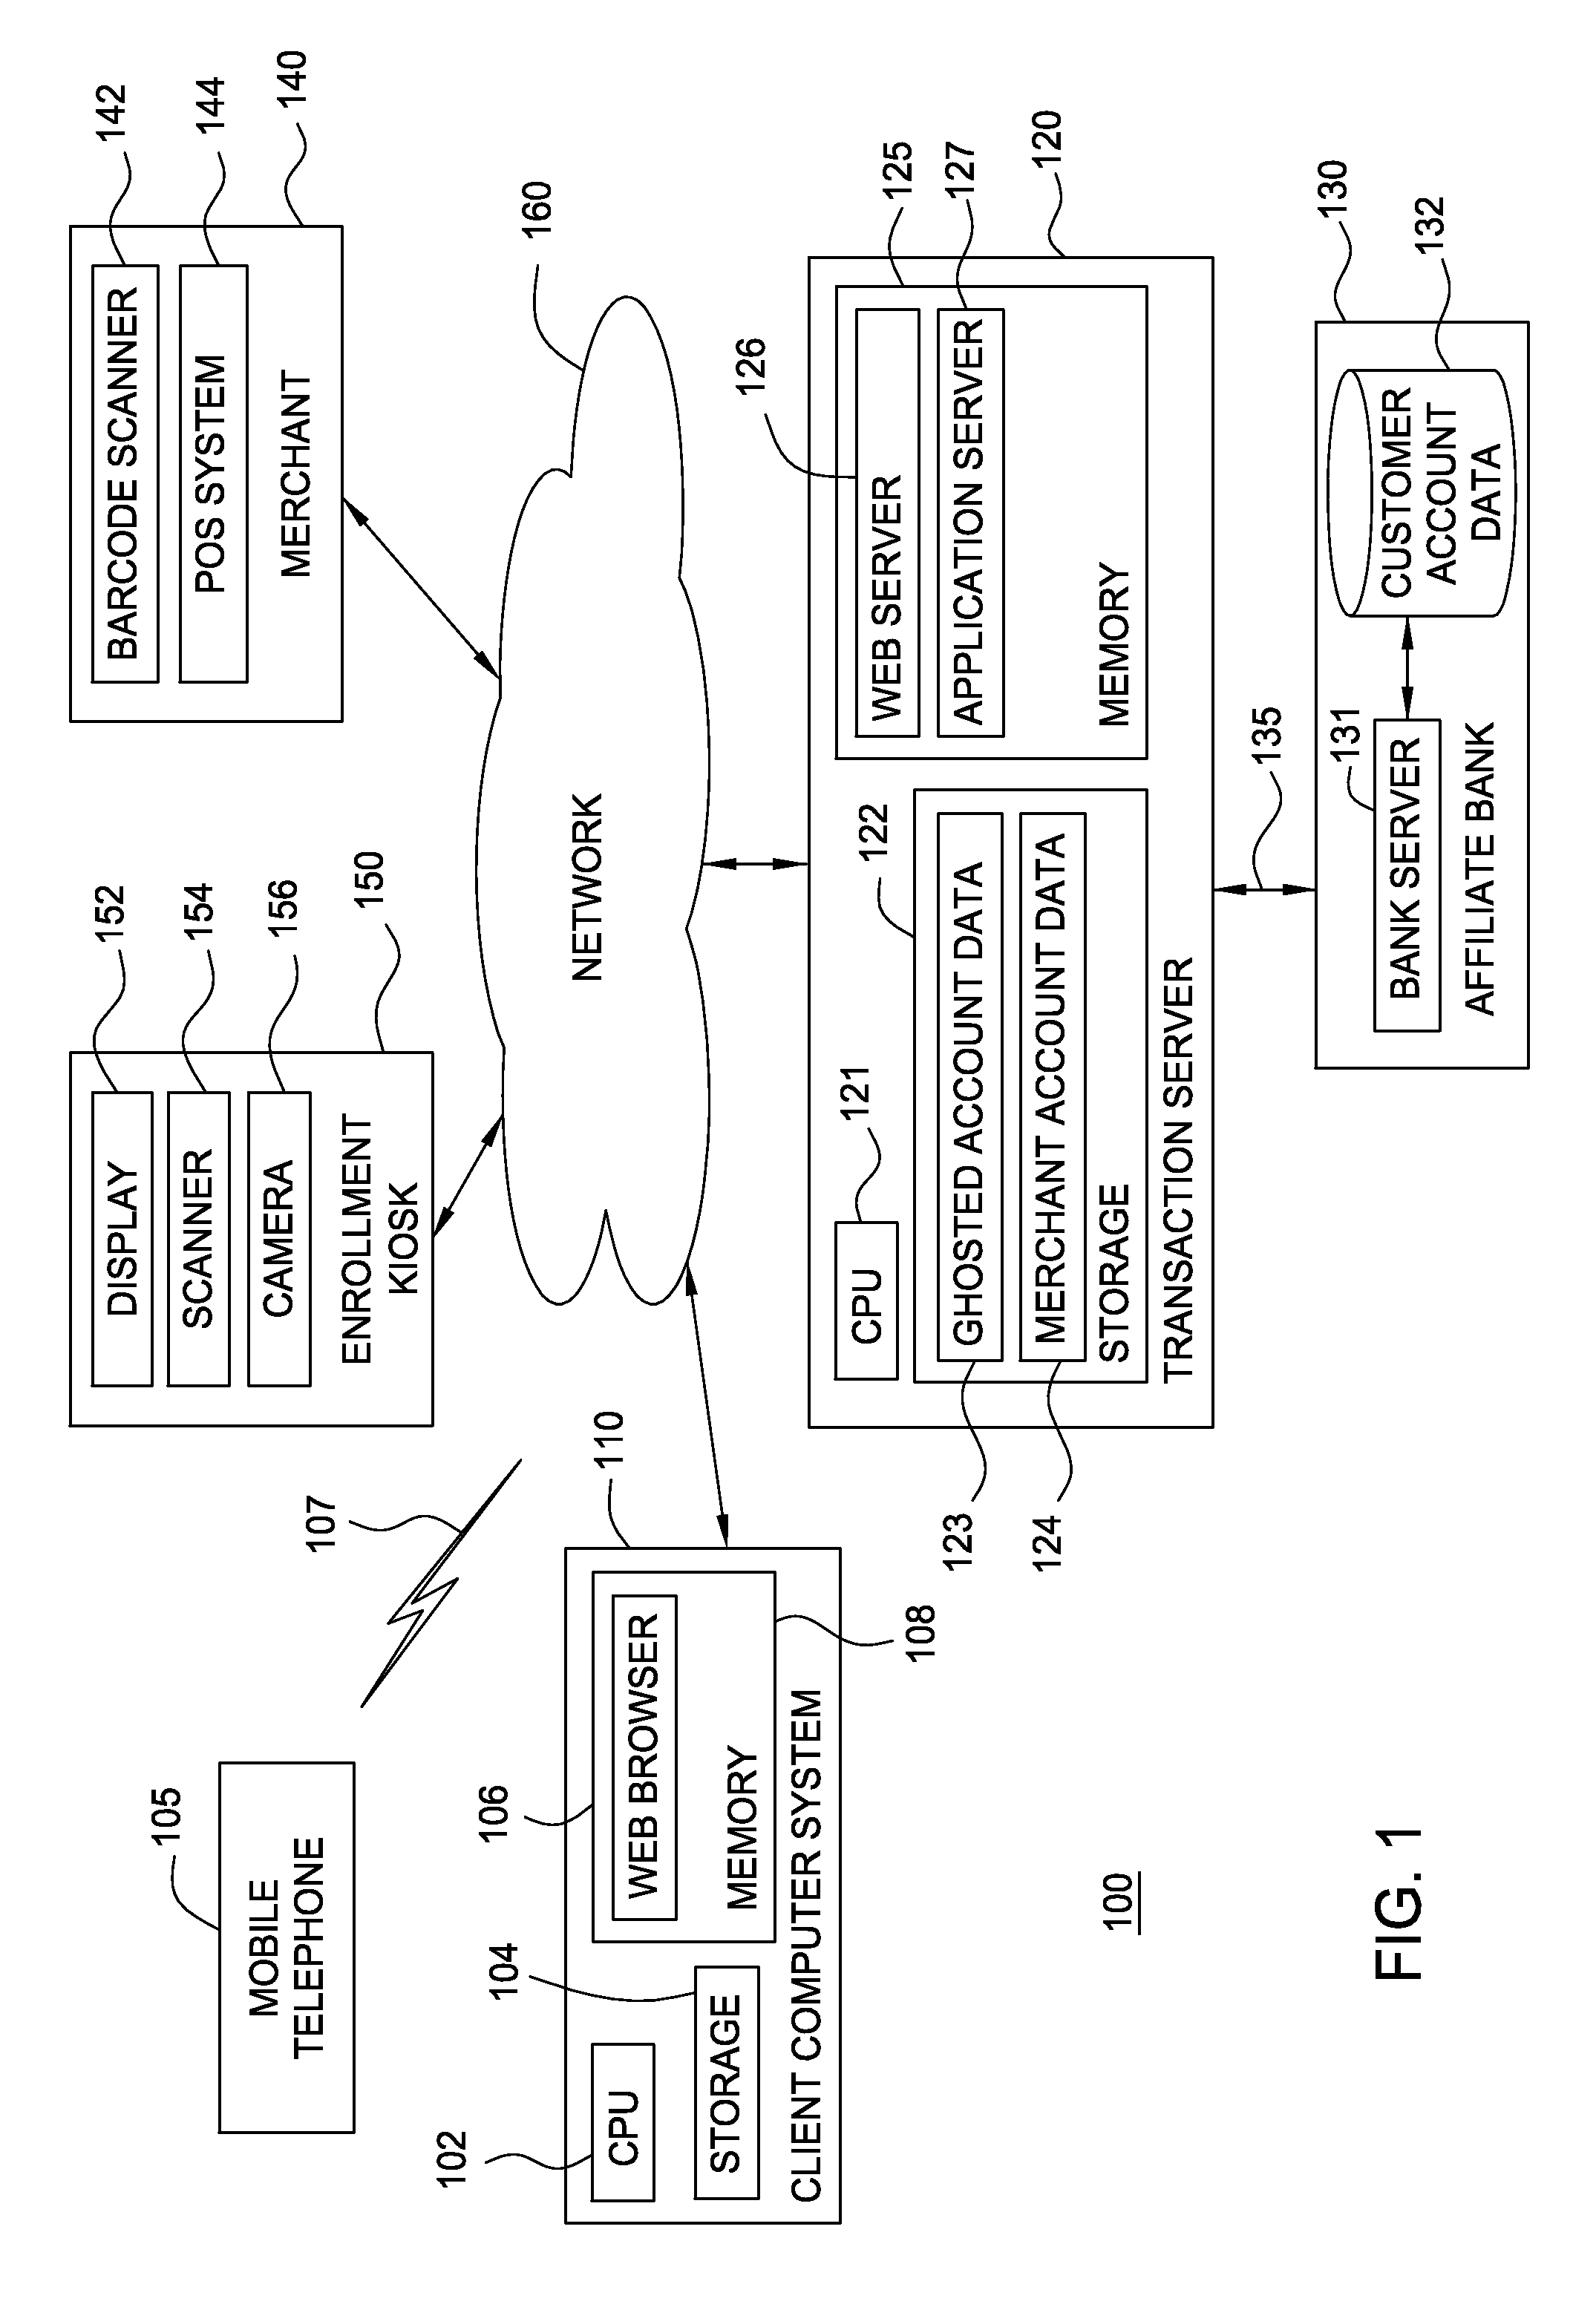 Mobile telephone transaction systems and methods